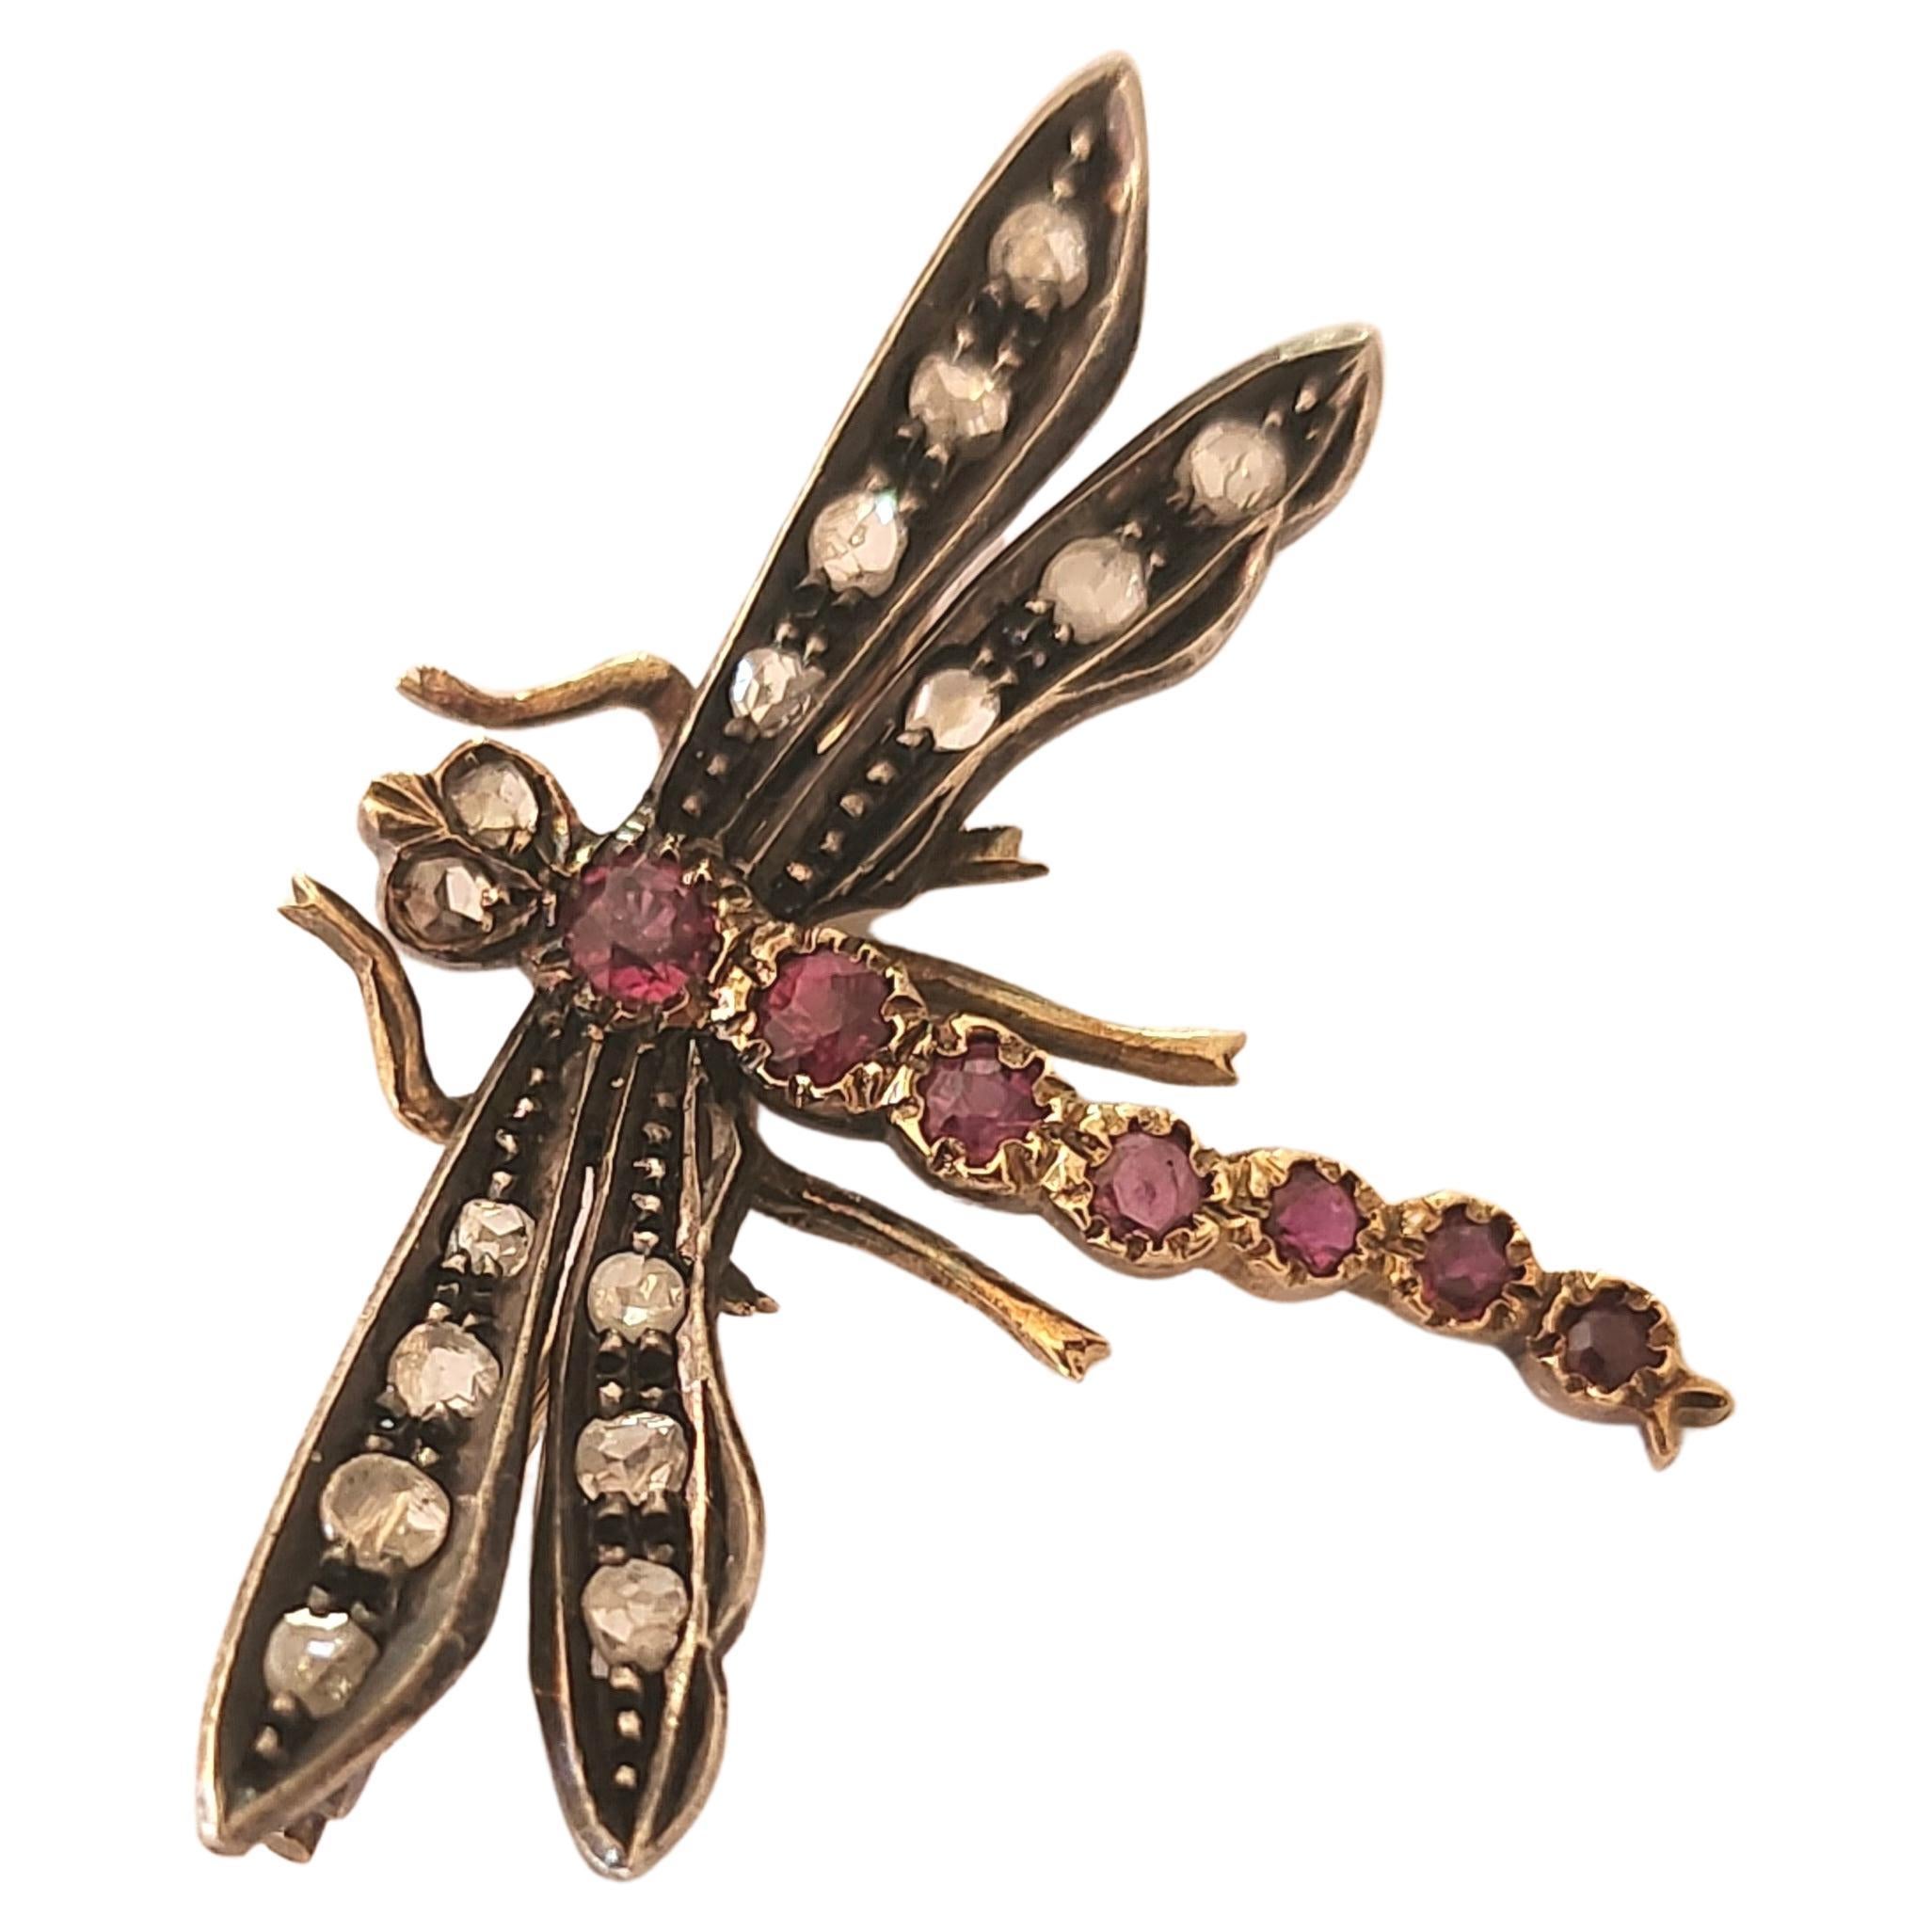 Antique brooch in dragon fly designe with natural pigioun blood ruby colour on tail and rose cut diamonds on wings brooch lenght is 2.5 cm hall marked with initial maker mark 